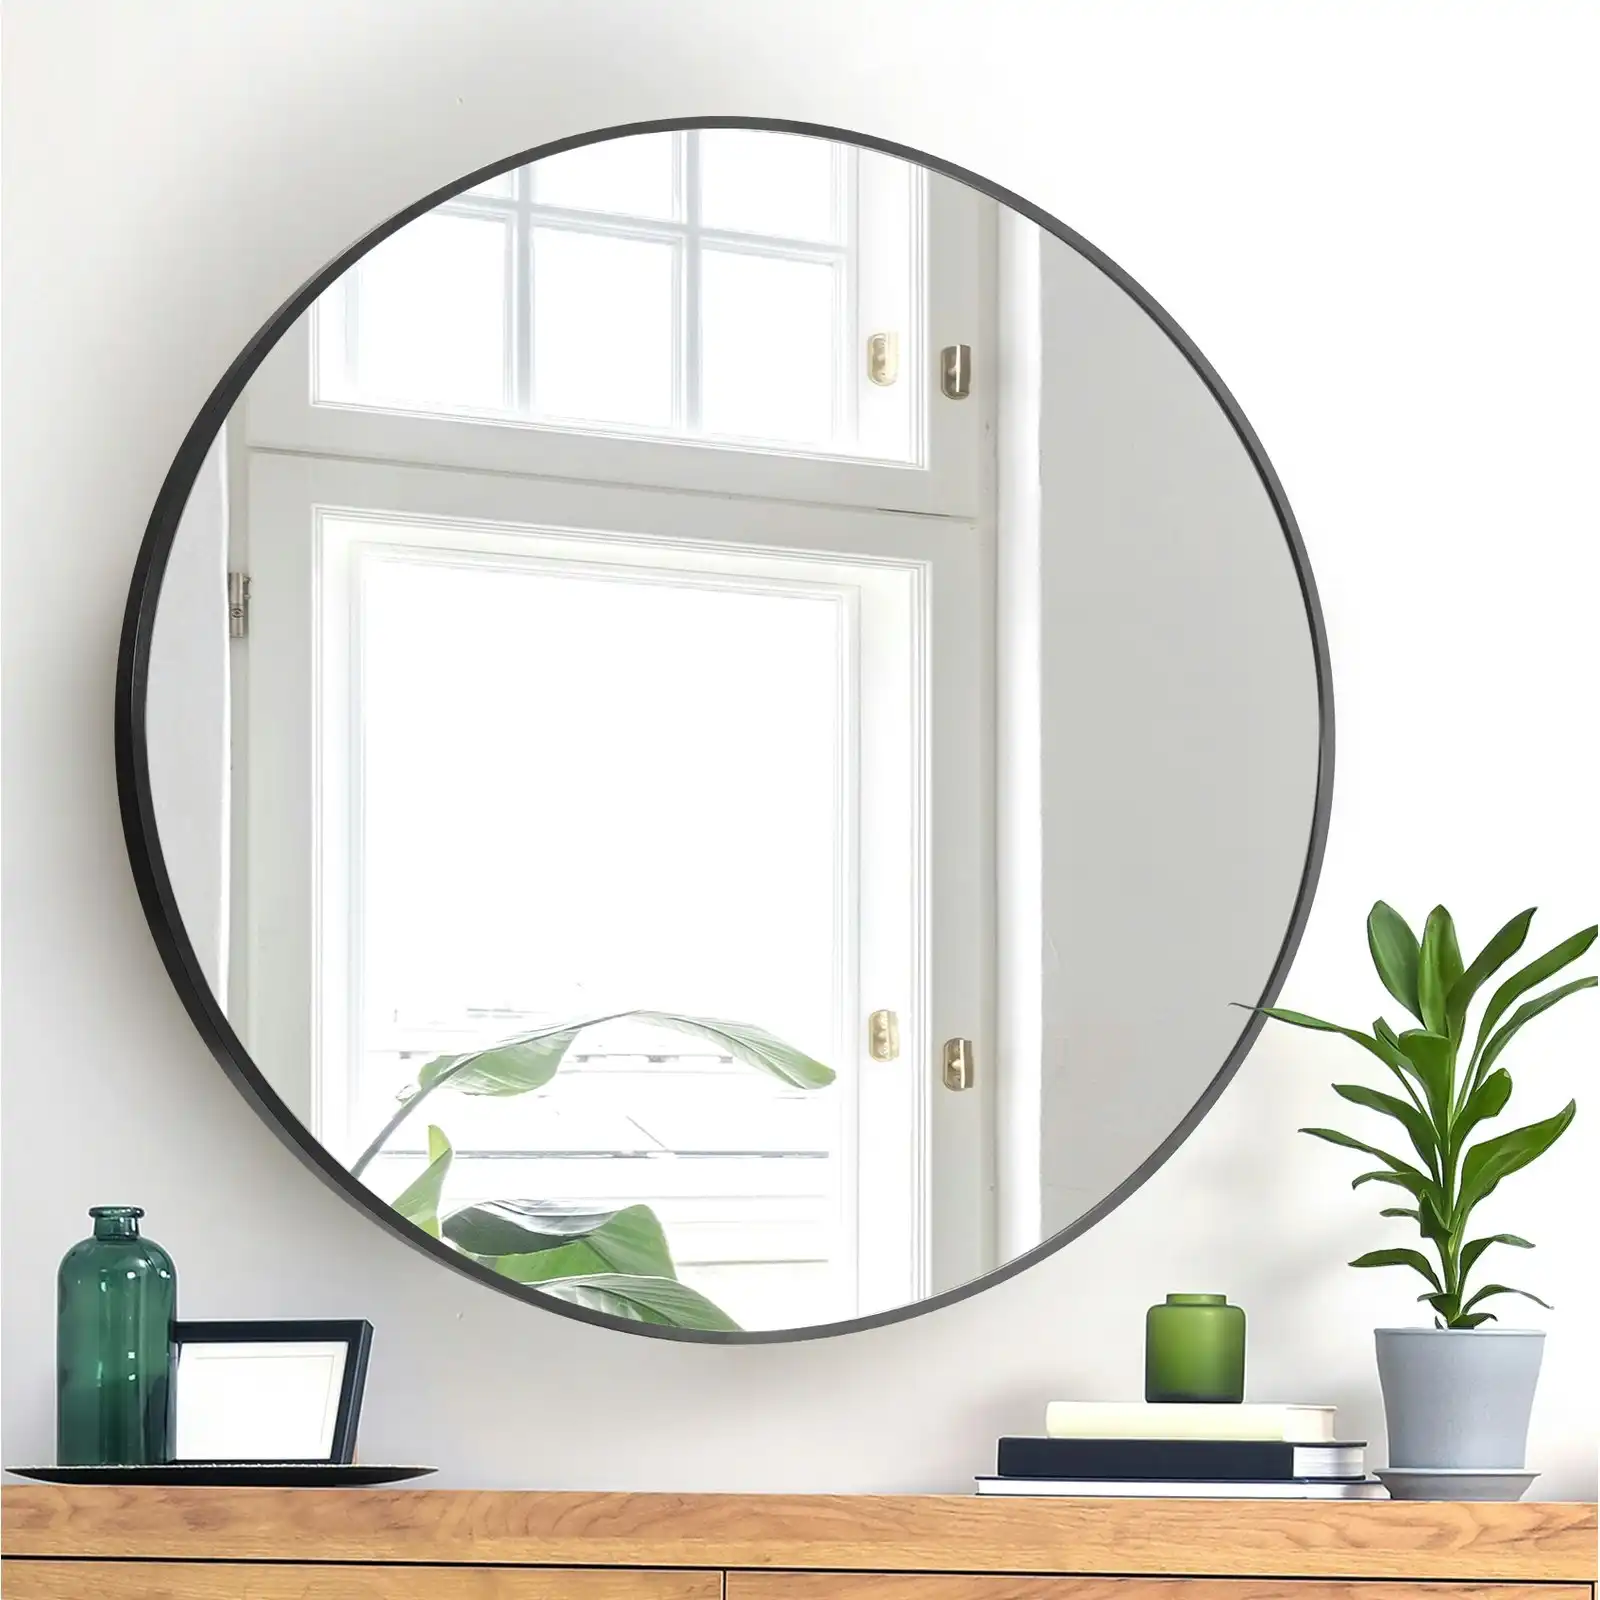 Oikiture Wall Mirrors Round Makeup Mirror Vanity Home Decorative Black 80cm